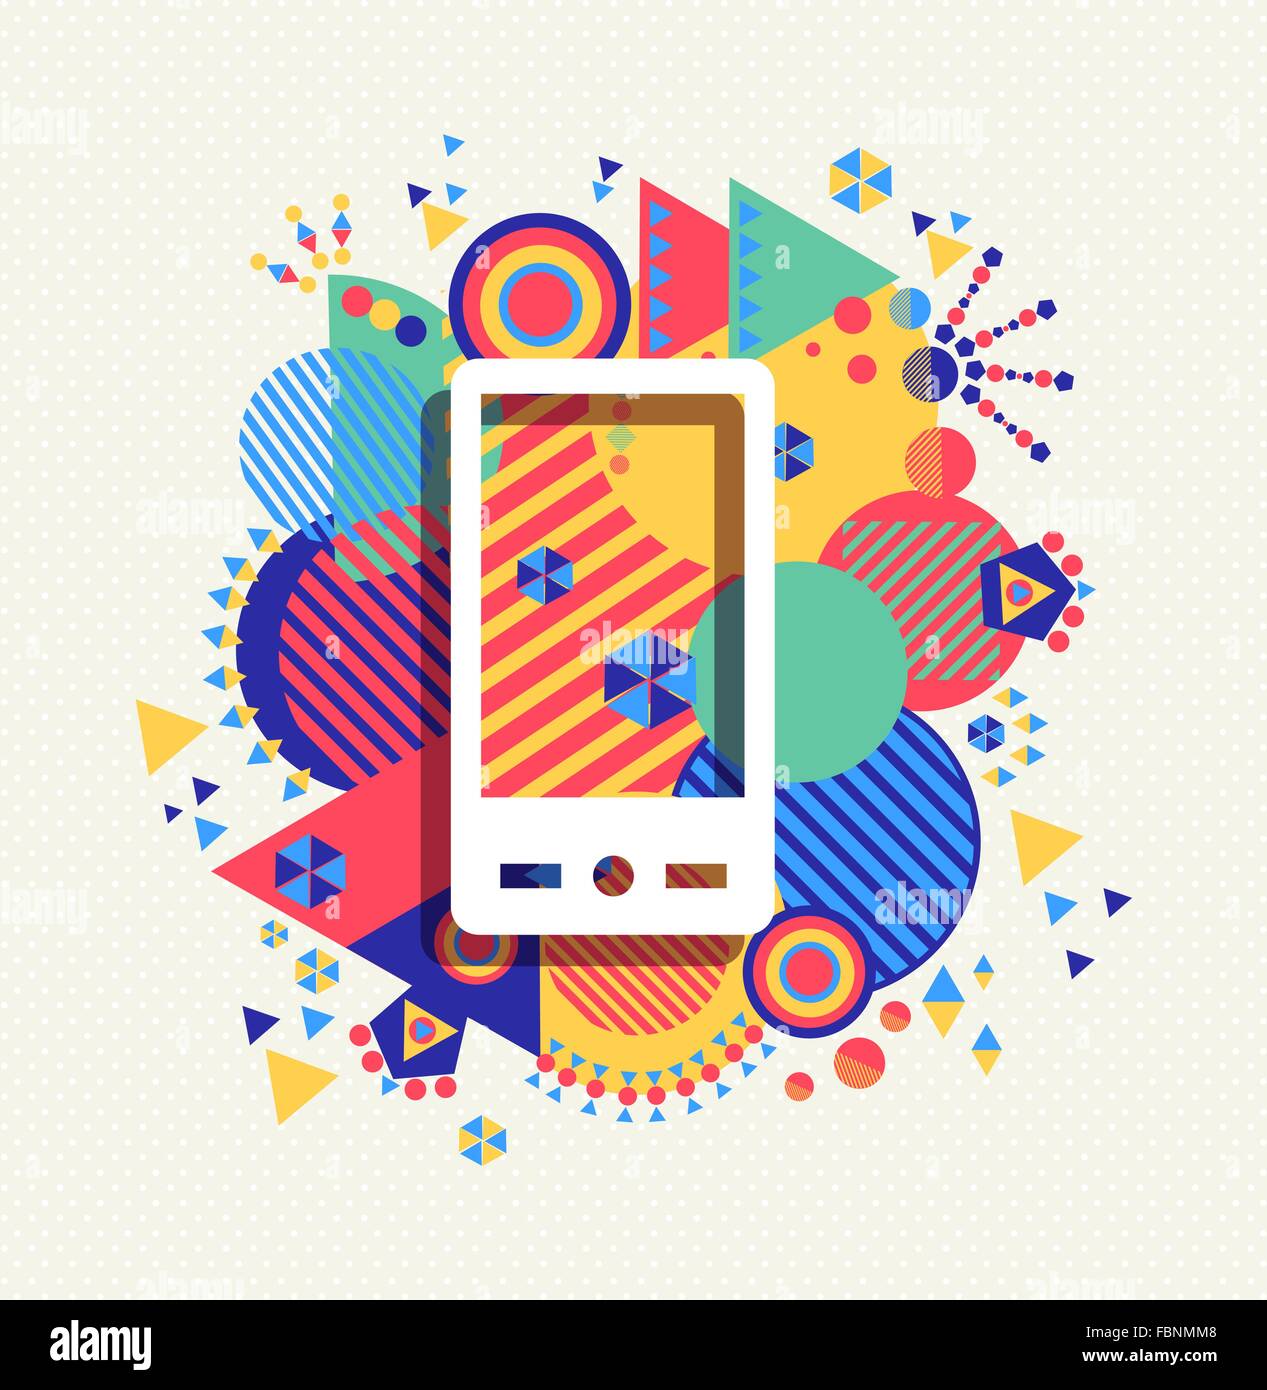 Mobile cell phone icon app poster illustration with colorful vibrant geometry shapes background. Social media concept. EPS10 Stock Vector